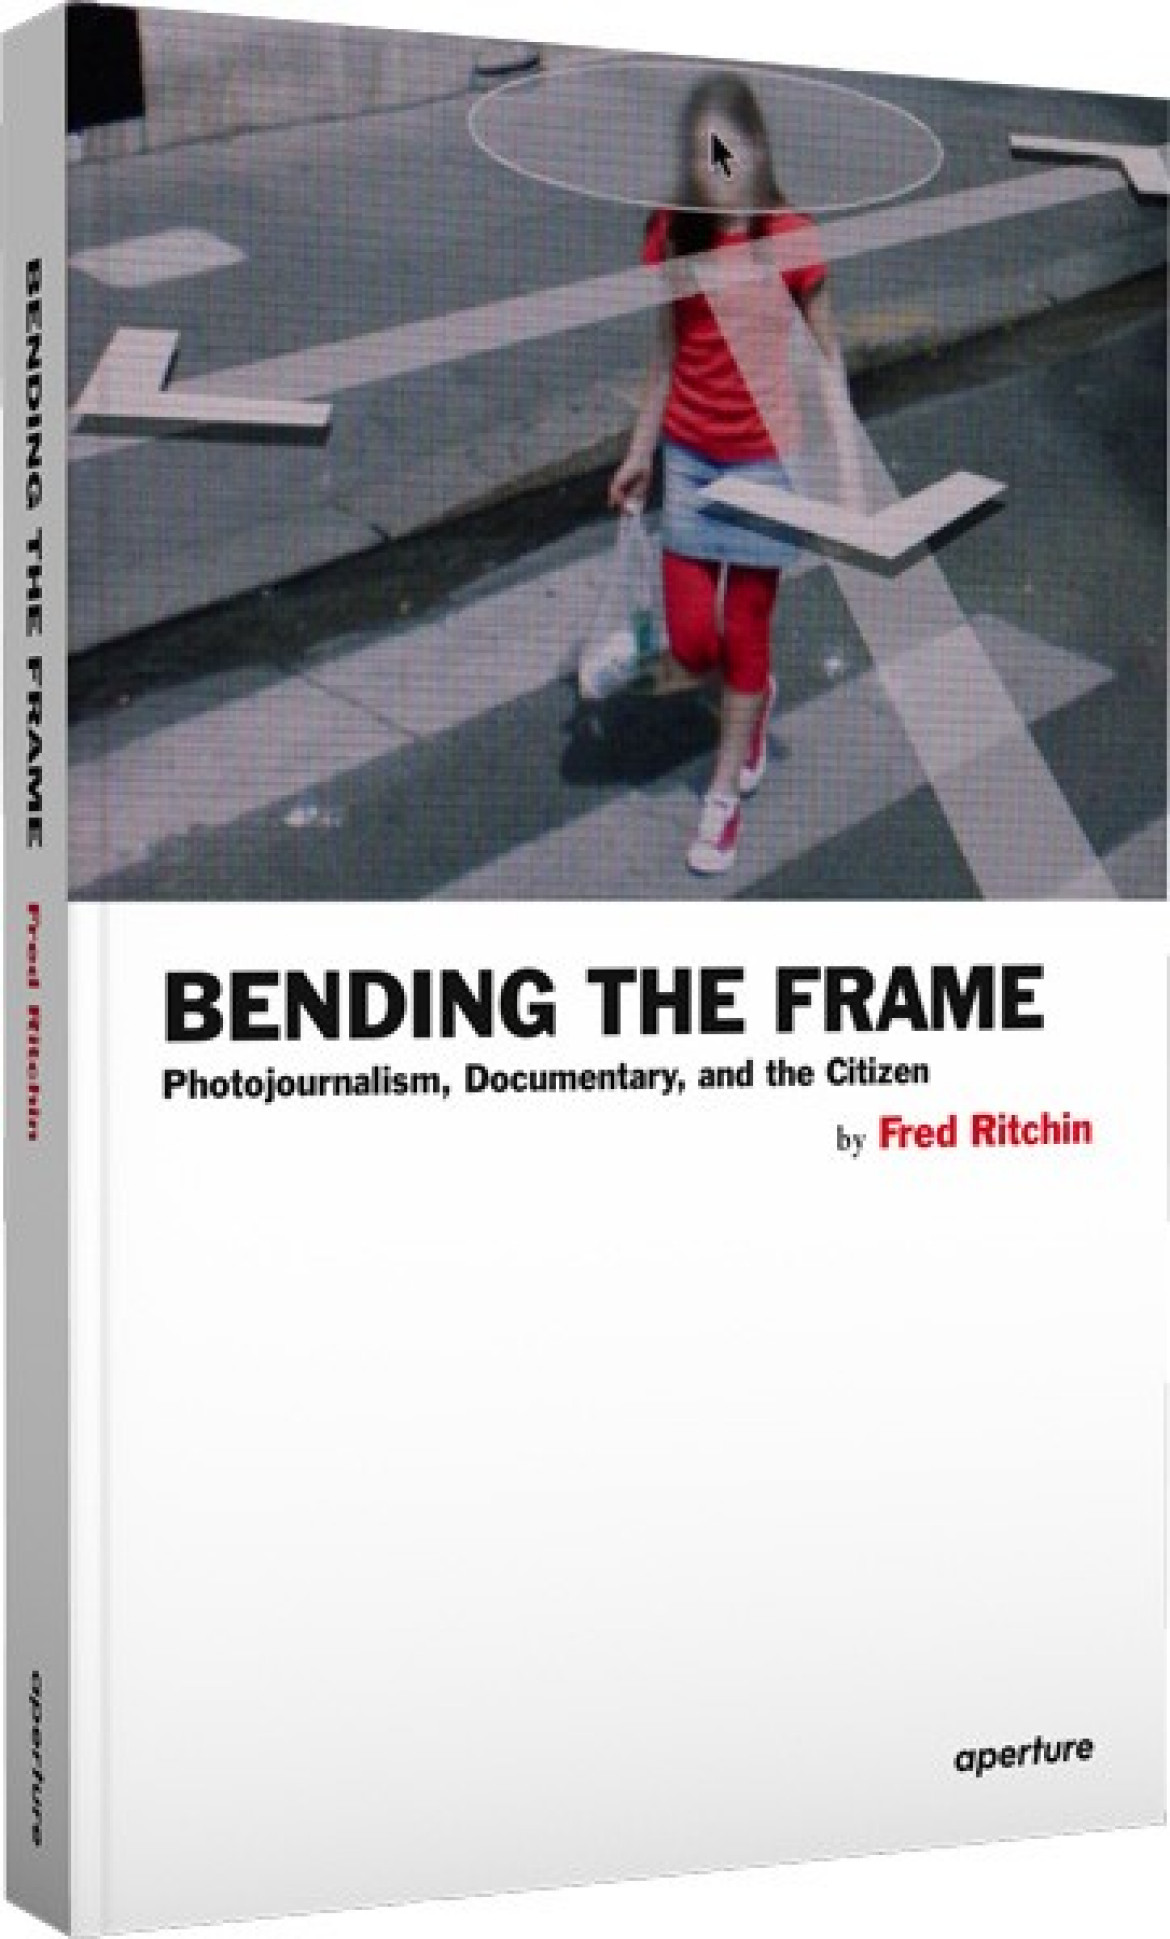 Fred Ritchin "Bending the frame. Photojournalism, Documentary, and the Citizen”